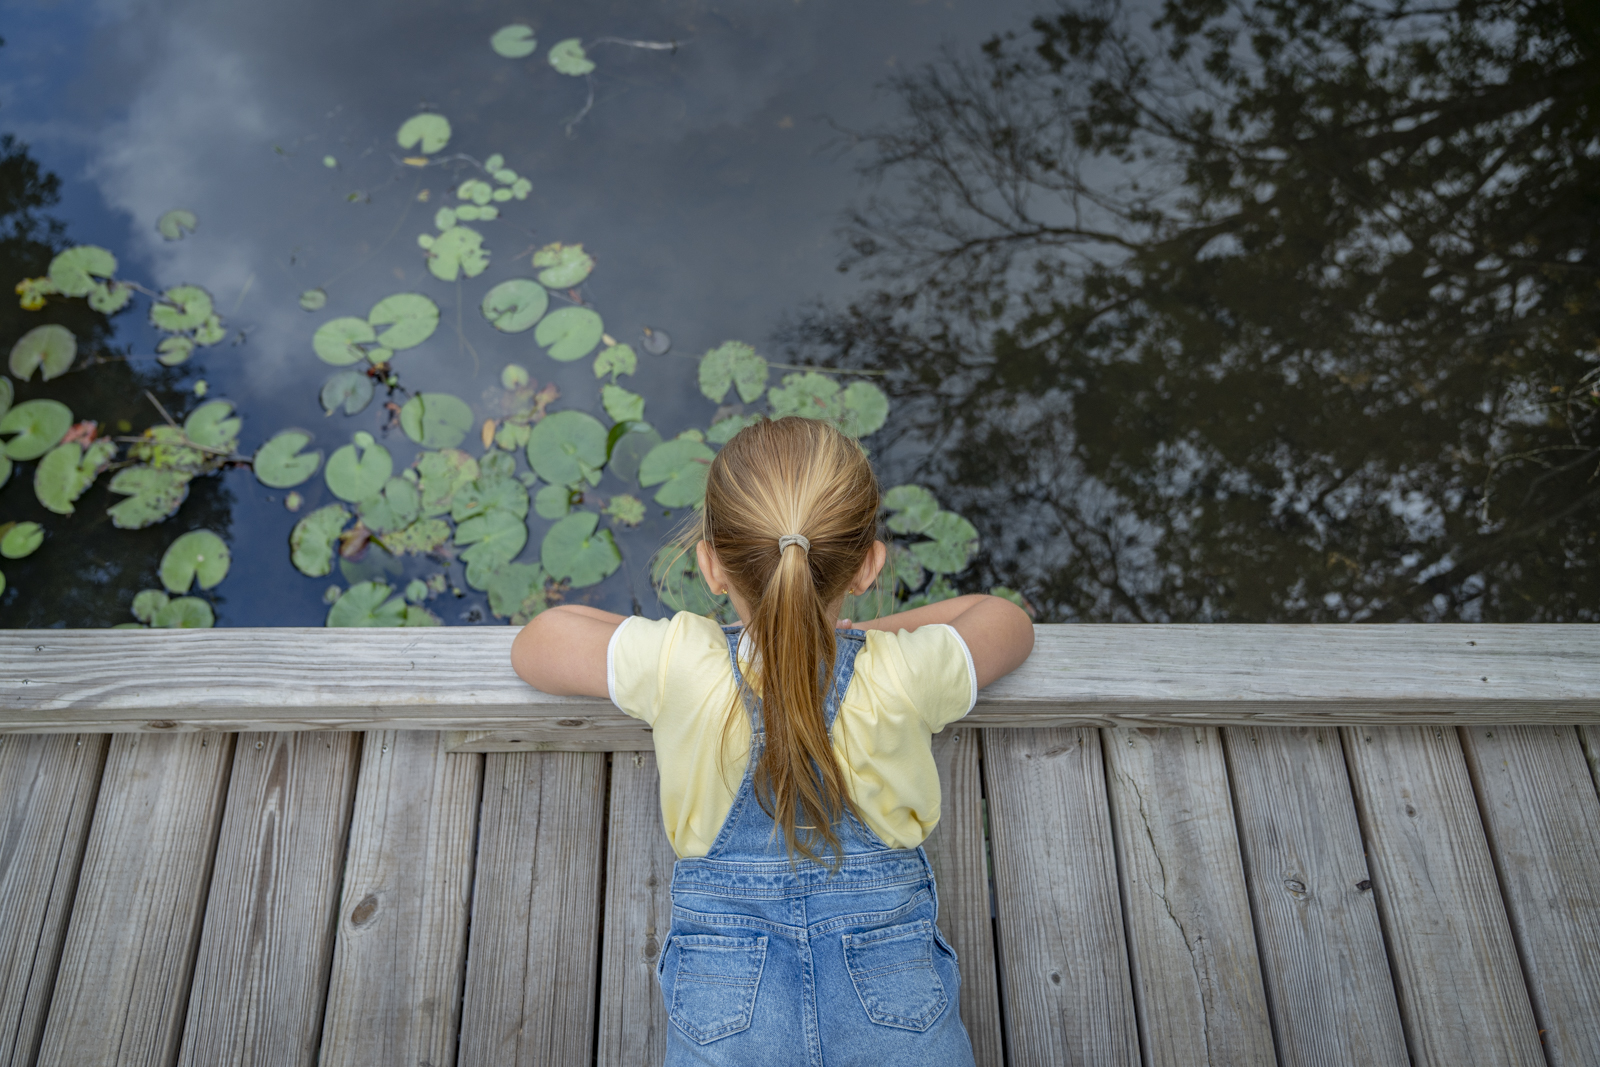 A little girl looking out over a pond filled with lilypads.